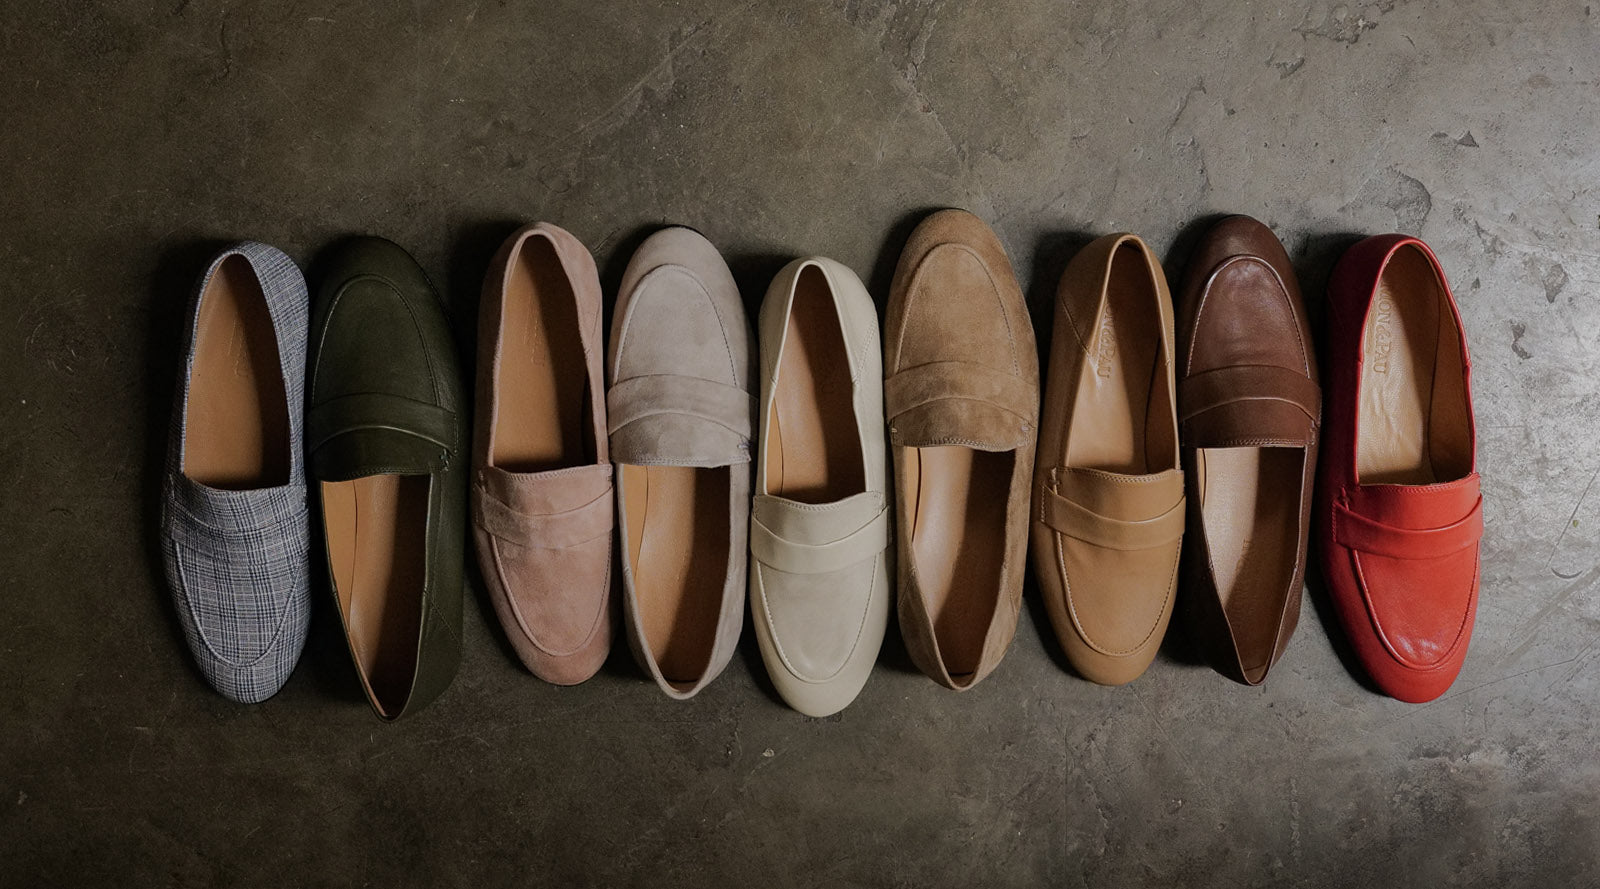 Women's leather shoes and loafers by MON&PAU. Sustainable shoes made of leather leftovers